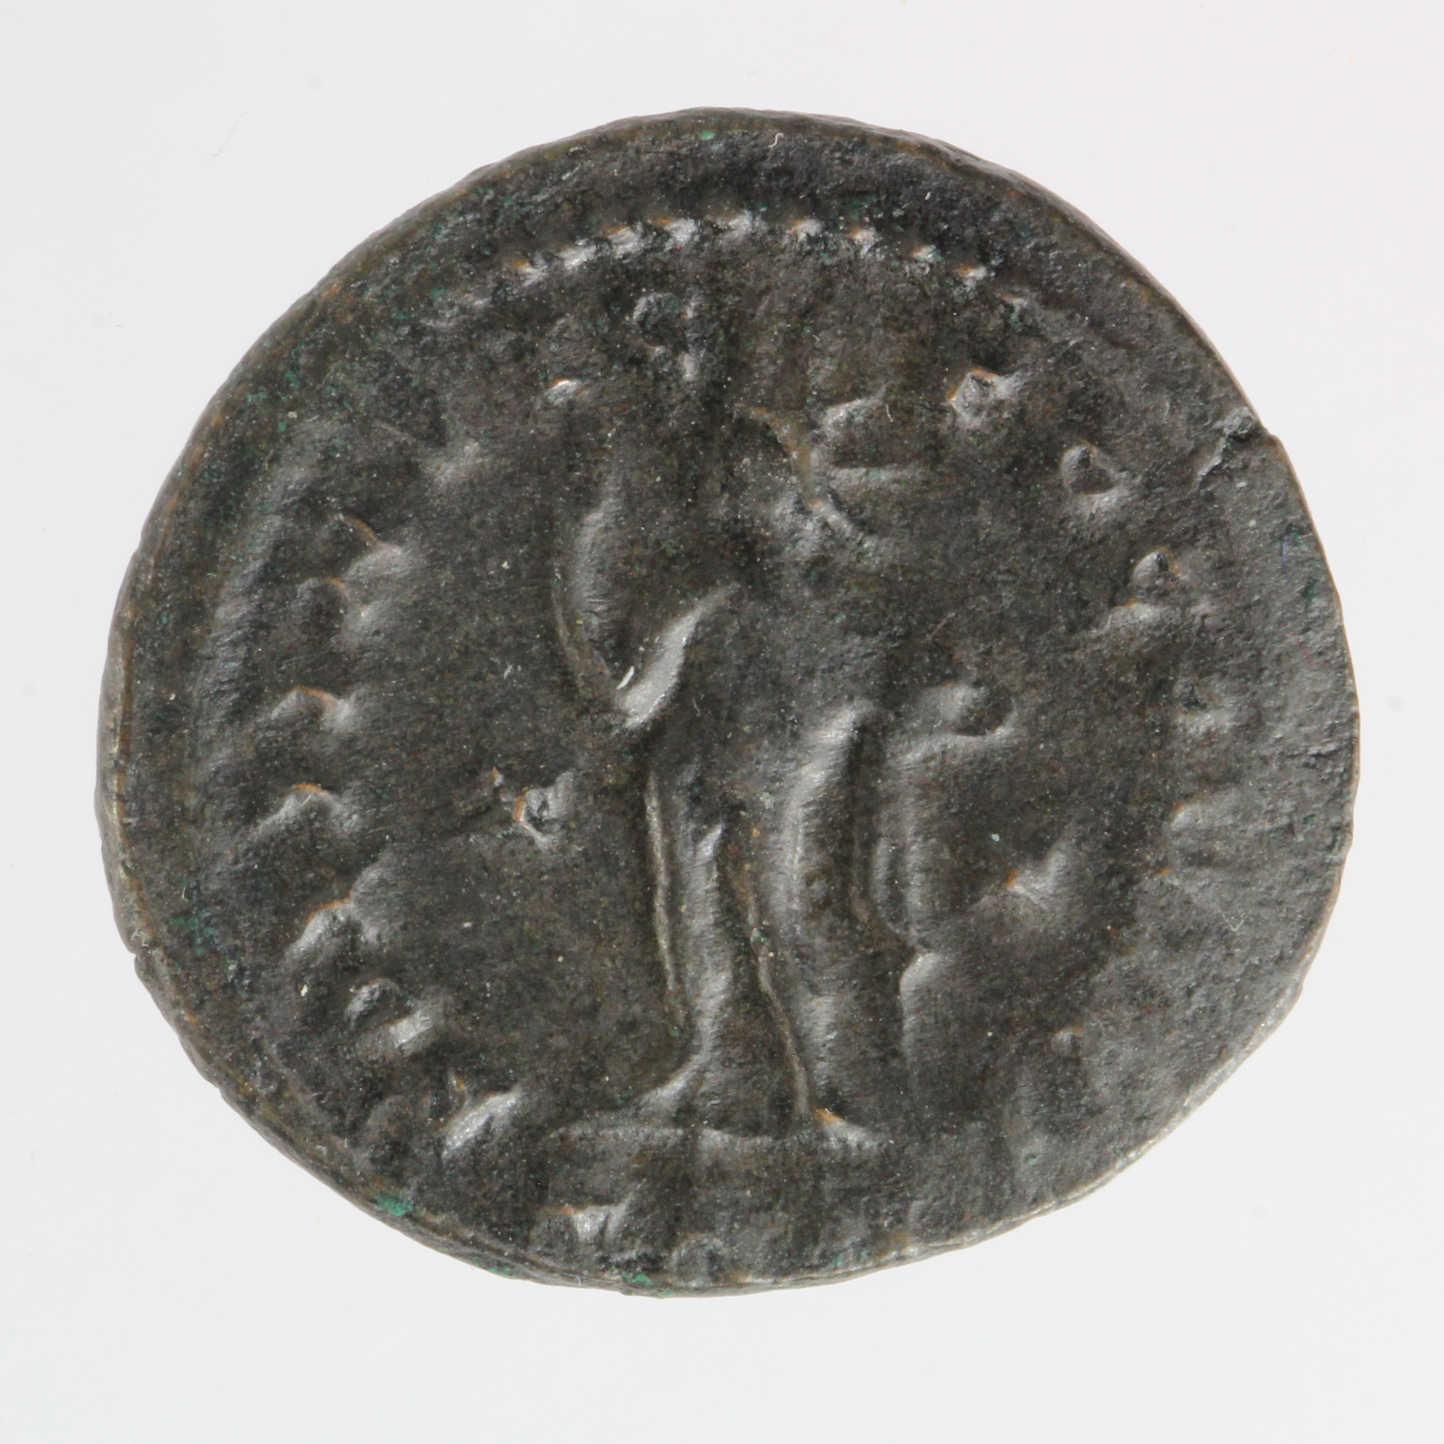 Constantine I the Great 307-337 A.D., billon follis of the London Mint, 310 A.D., obverse:- - Image 2 of 2